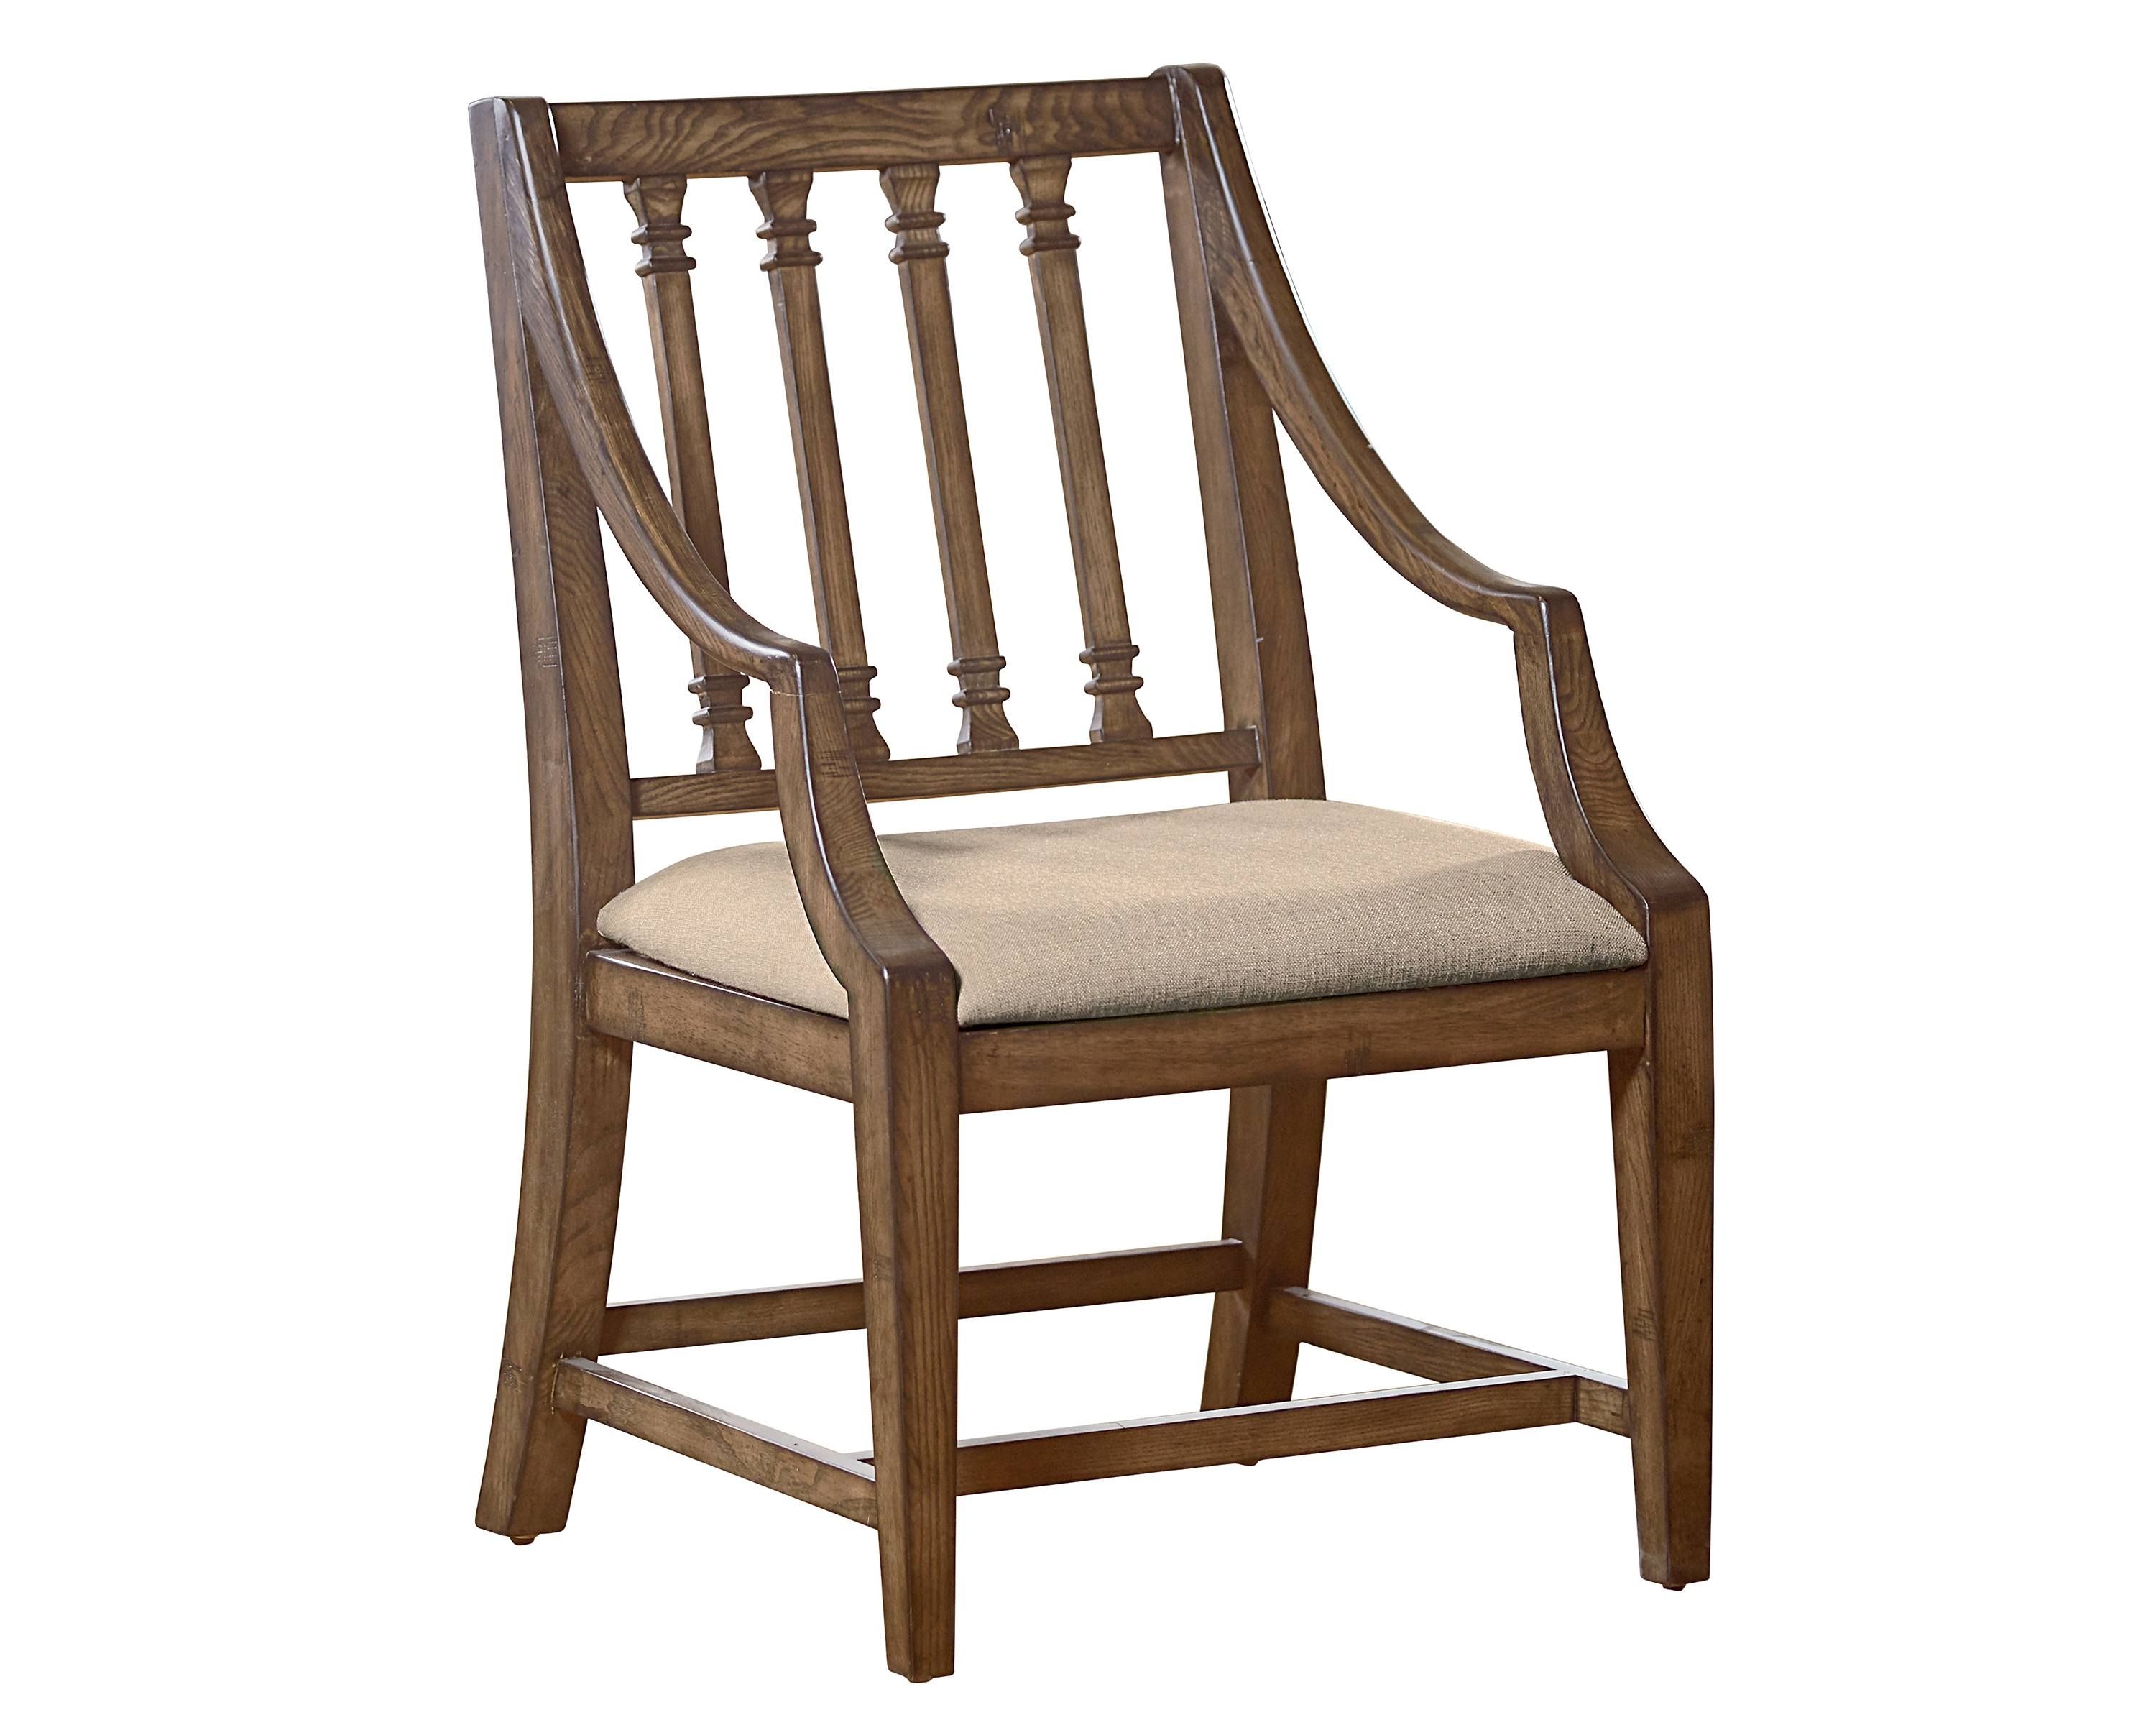 Magnolia Home Revival Jo's White Arm Chairs Intended For 2019 Revival Arm Chair – Magnolia Home (Photo 2 of 20)